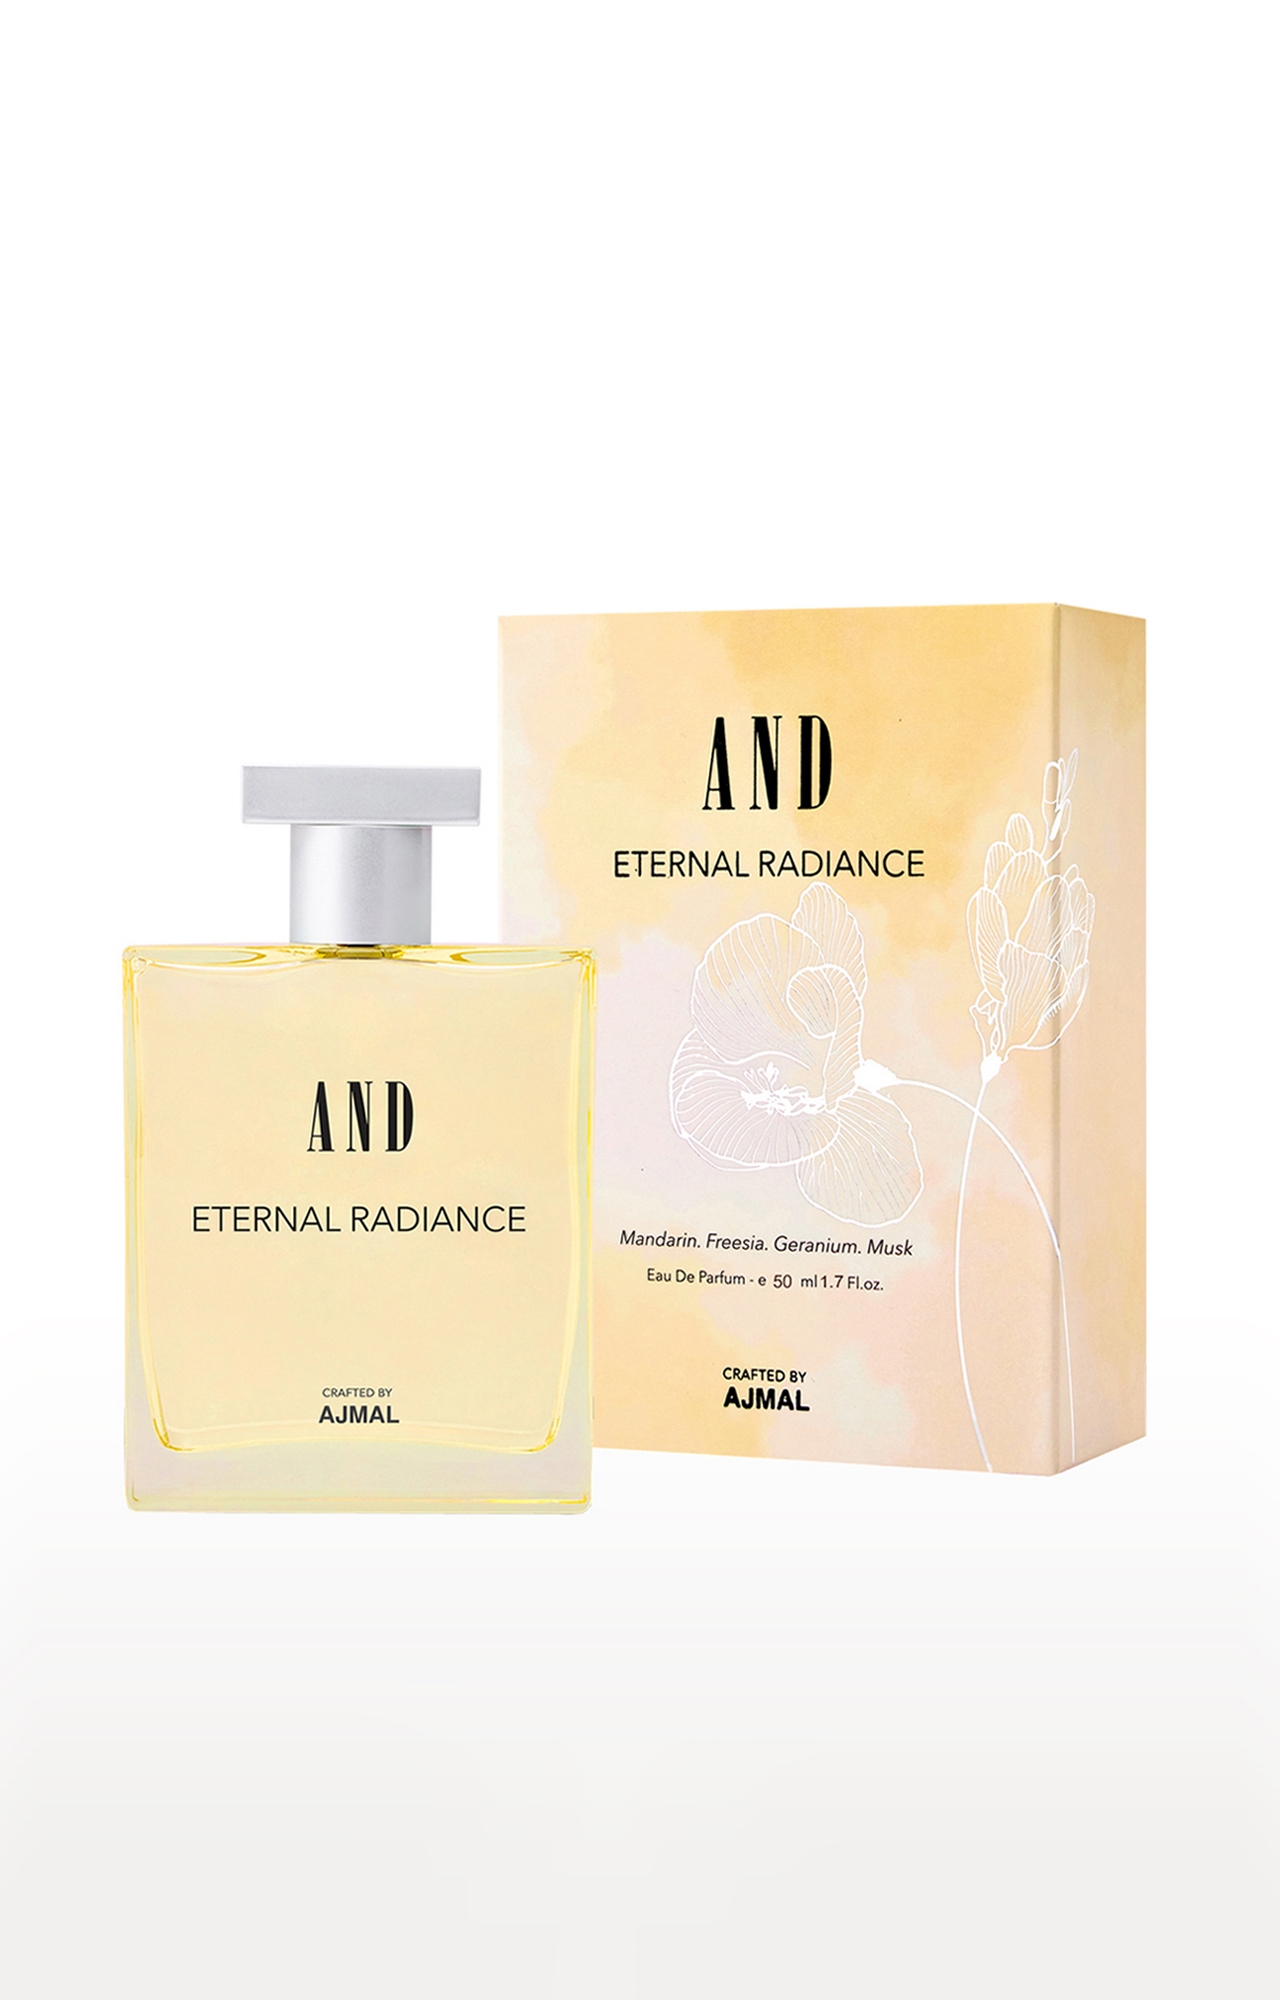 And Eternal Radiance Eau De Parfum 50ML Long Lasting Scent Spray Gift For Women Crafted By Ajmal